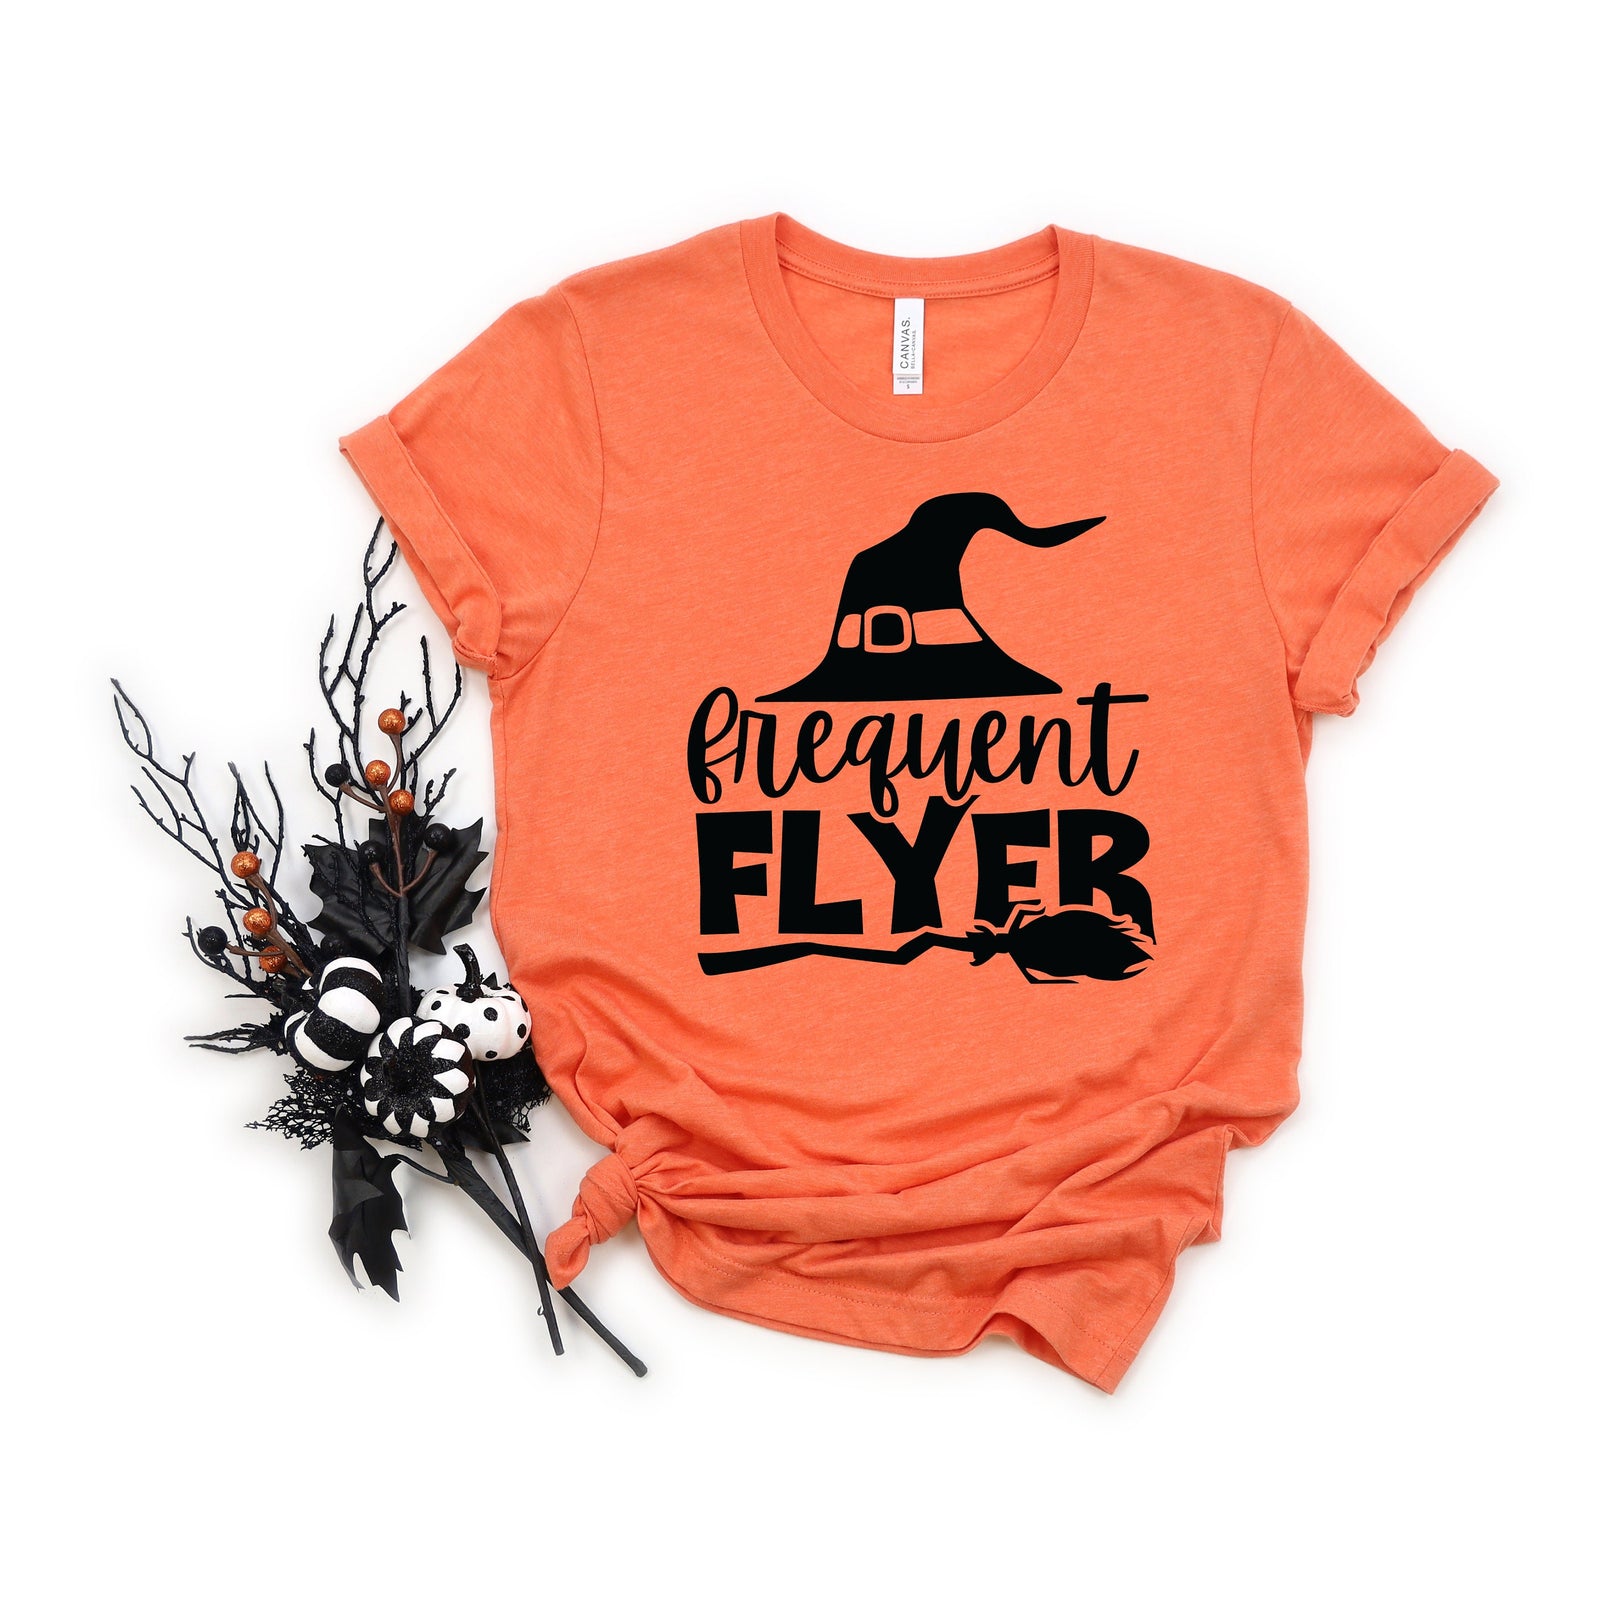 Frequent Flyer Adult T Shirt - Halloween - Office - School - Teacher - Grade Level - Funny Not So Scary Witch Hat